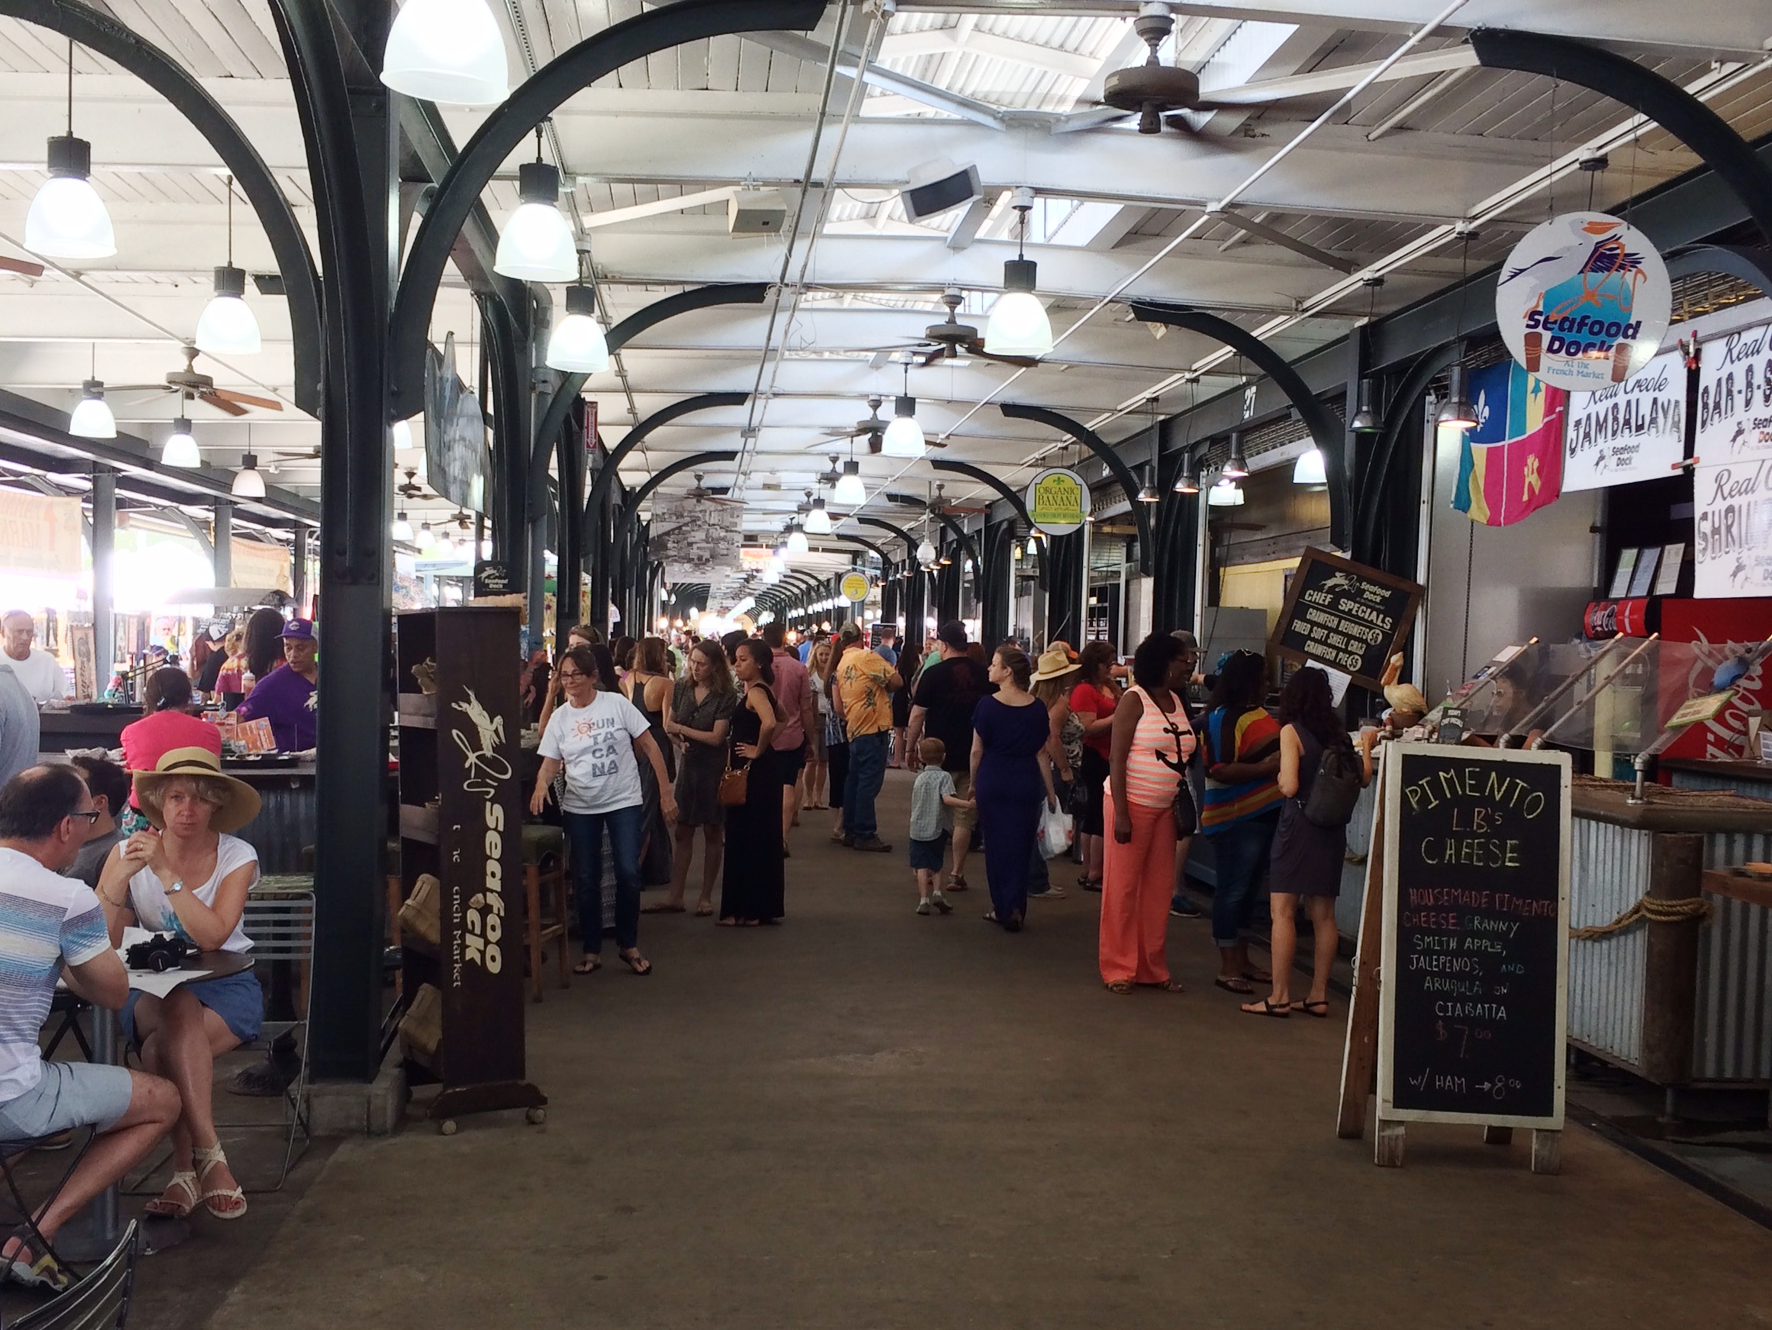 New Orleans French Market